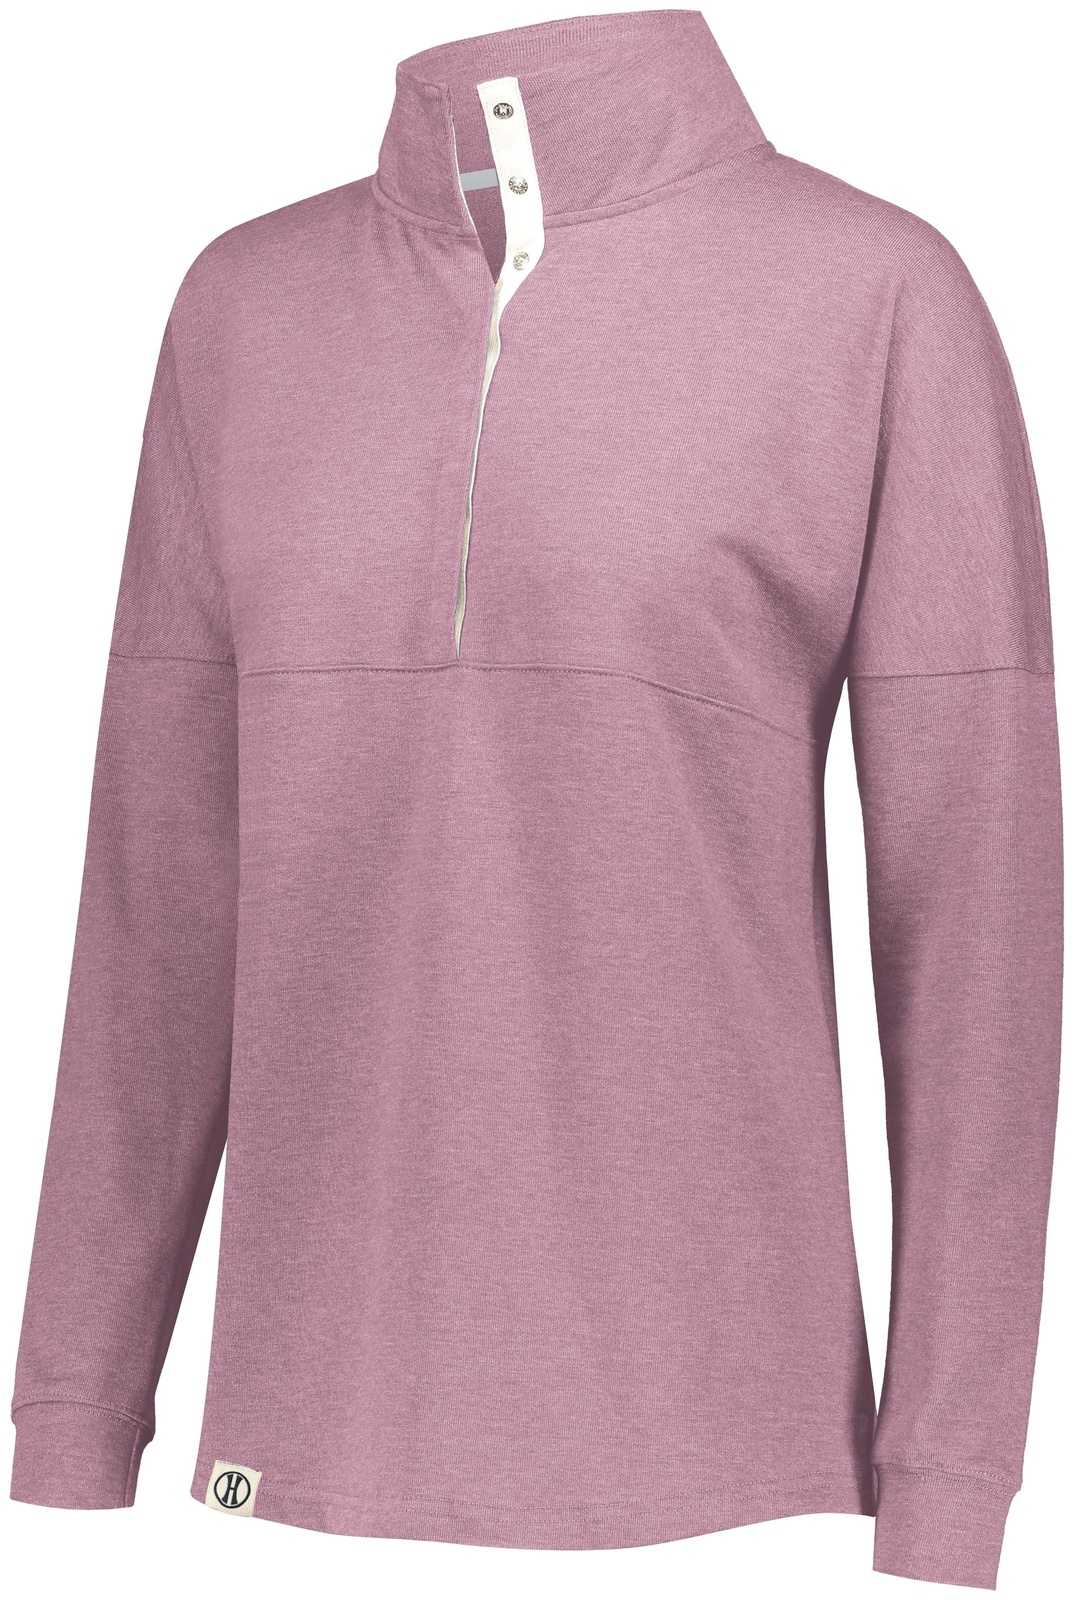 Holloway 229775 Ladies Sophomore Pullover - Dusty Rose Heather - HIT a Double